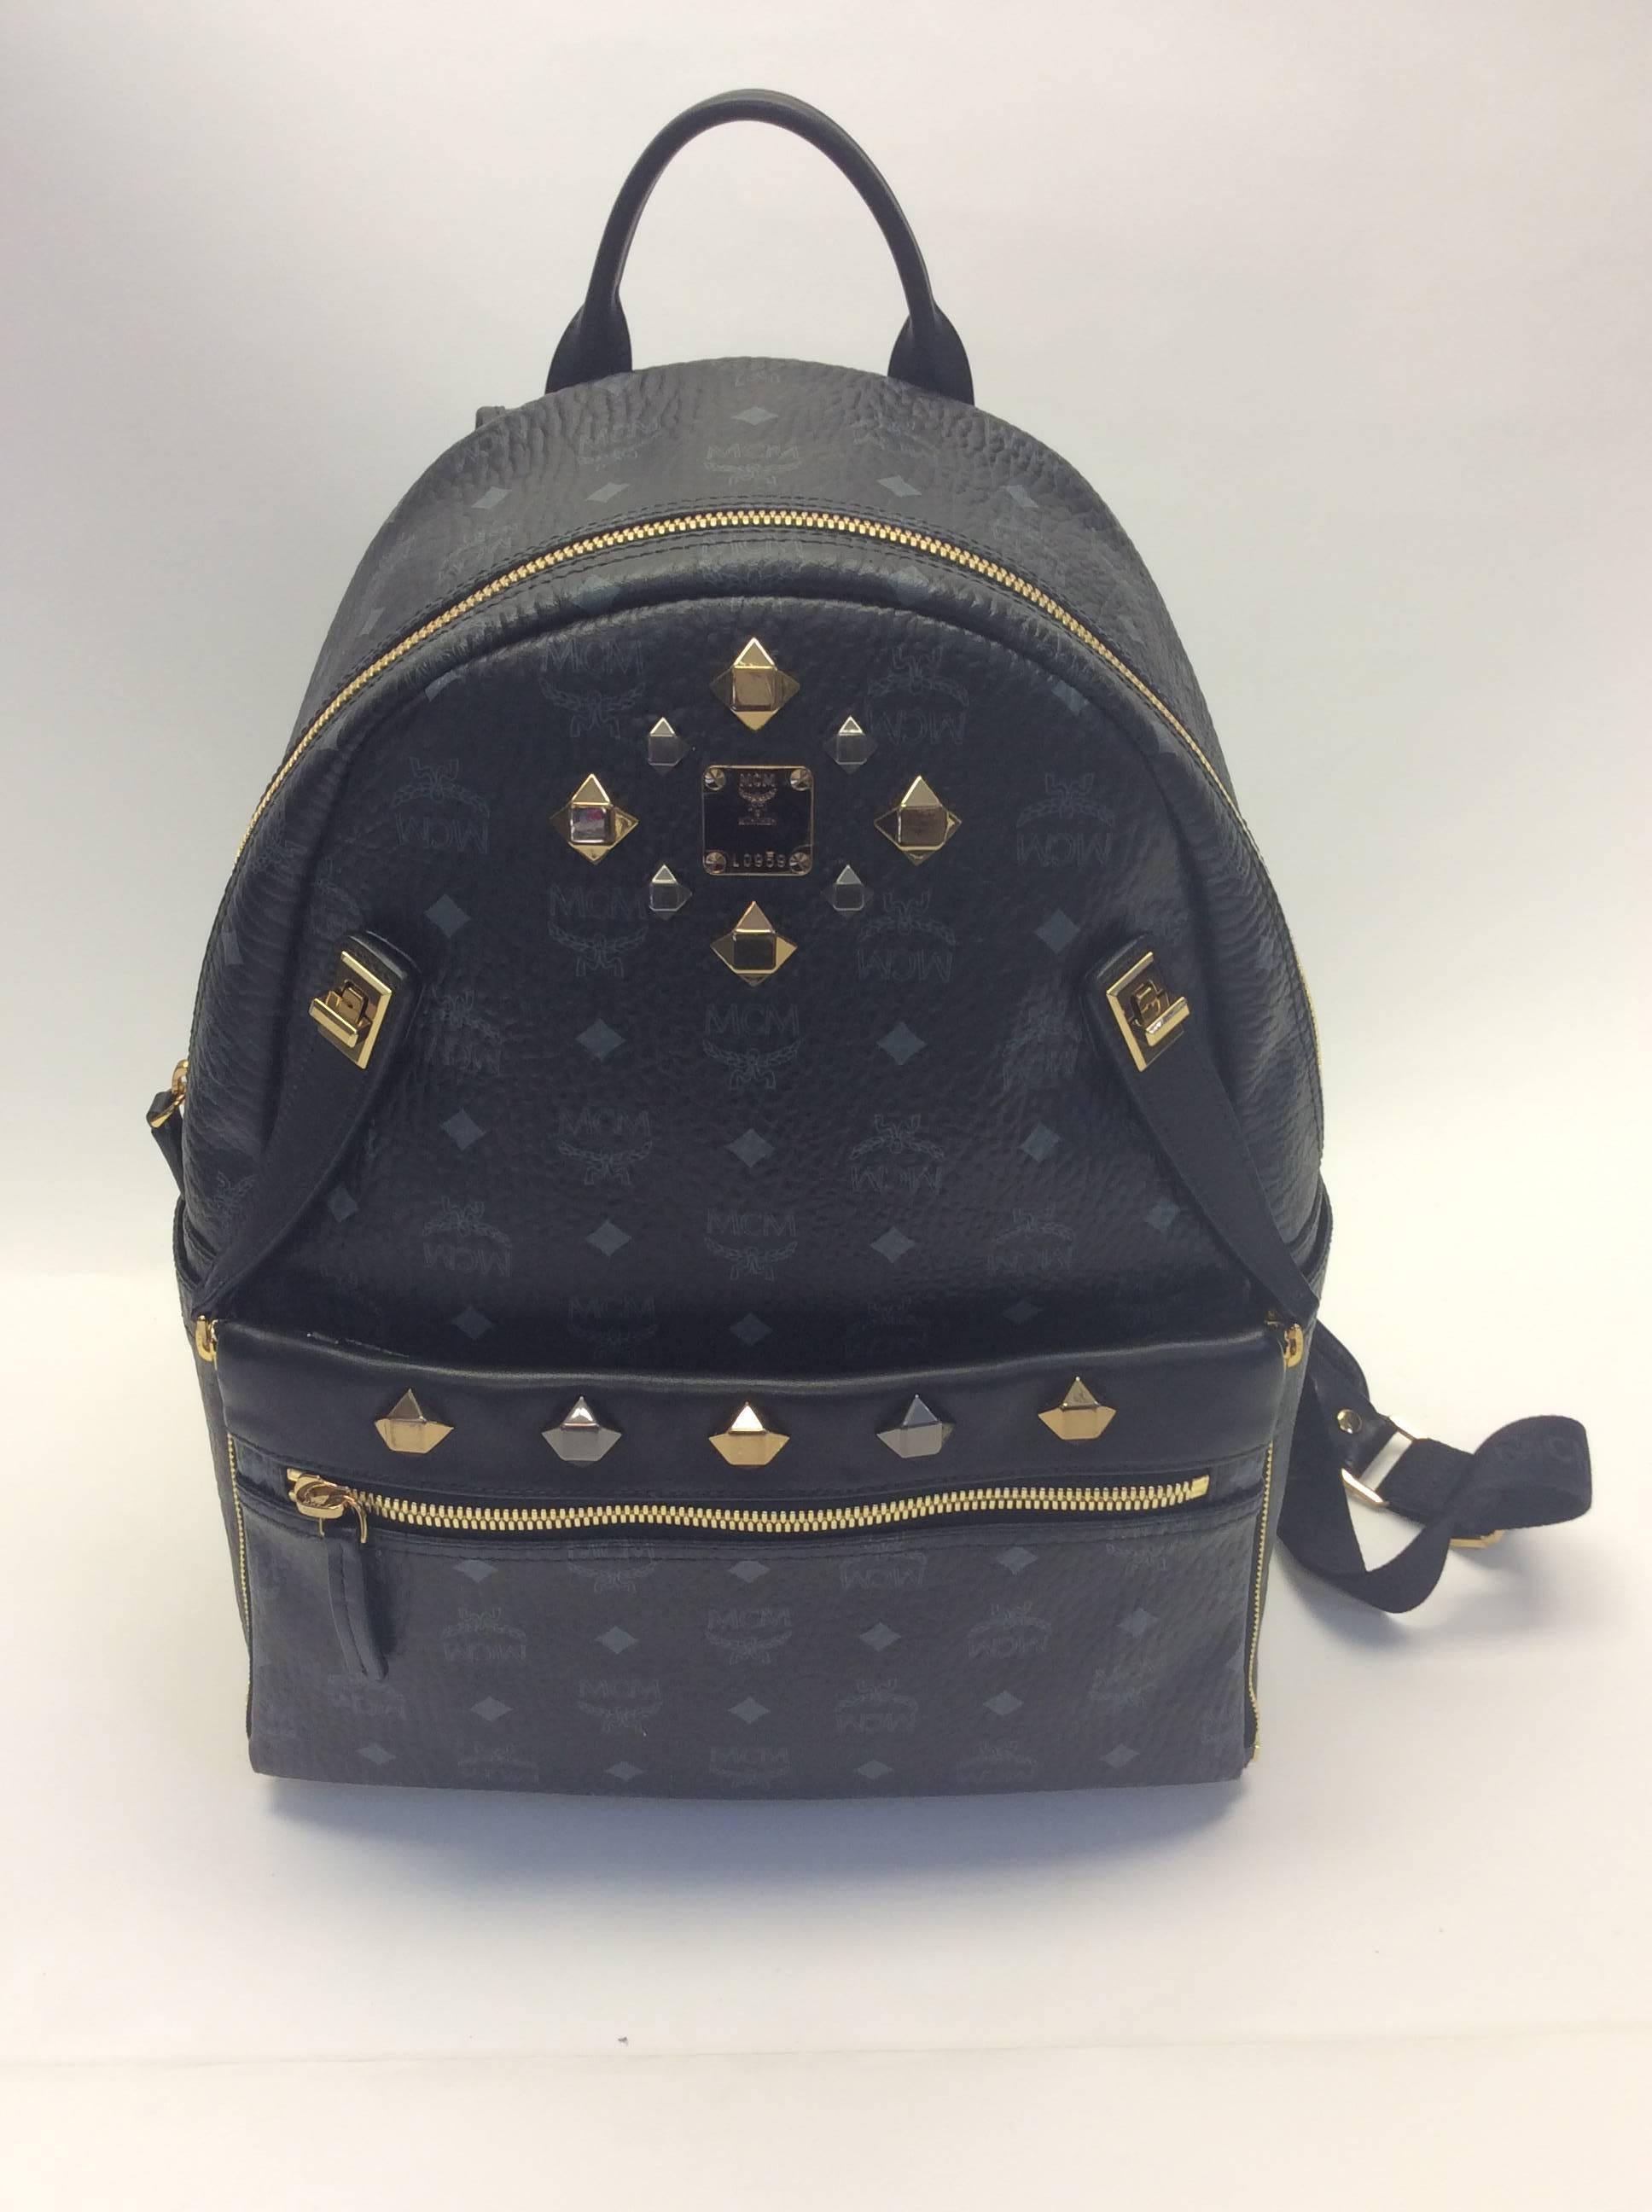 MCM Leather Logo Studded Black Backpack
Golden & silver oversized studs
Padded backpack straps
13 inches width, 15 inches height,  6 inches depth
New without tags
Inner strap included & still in packaging
Made in Korea
